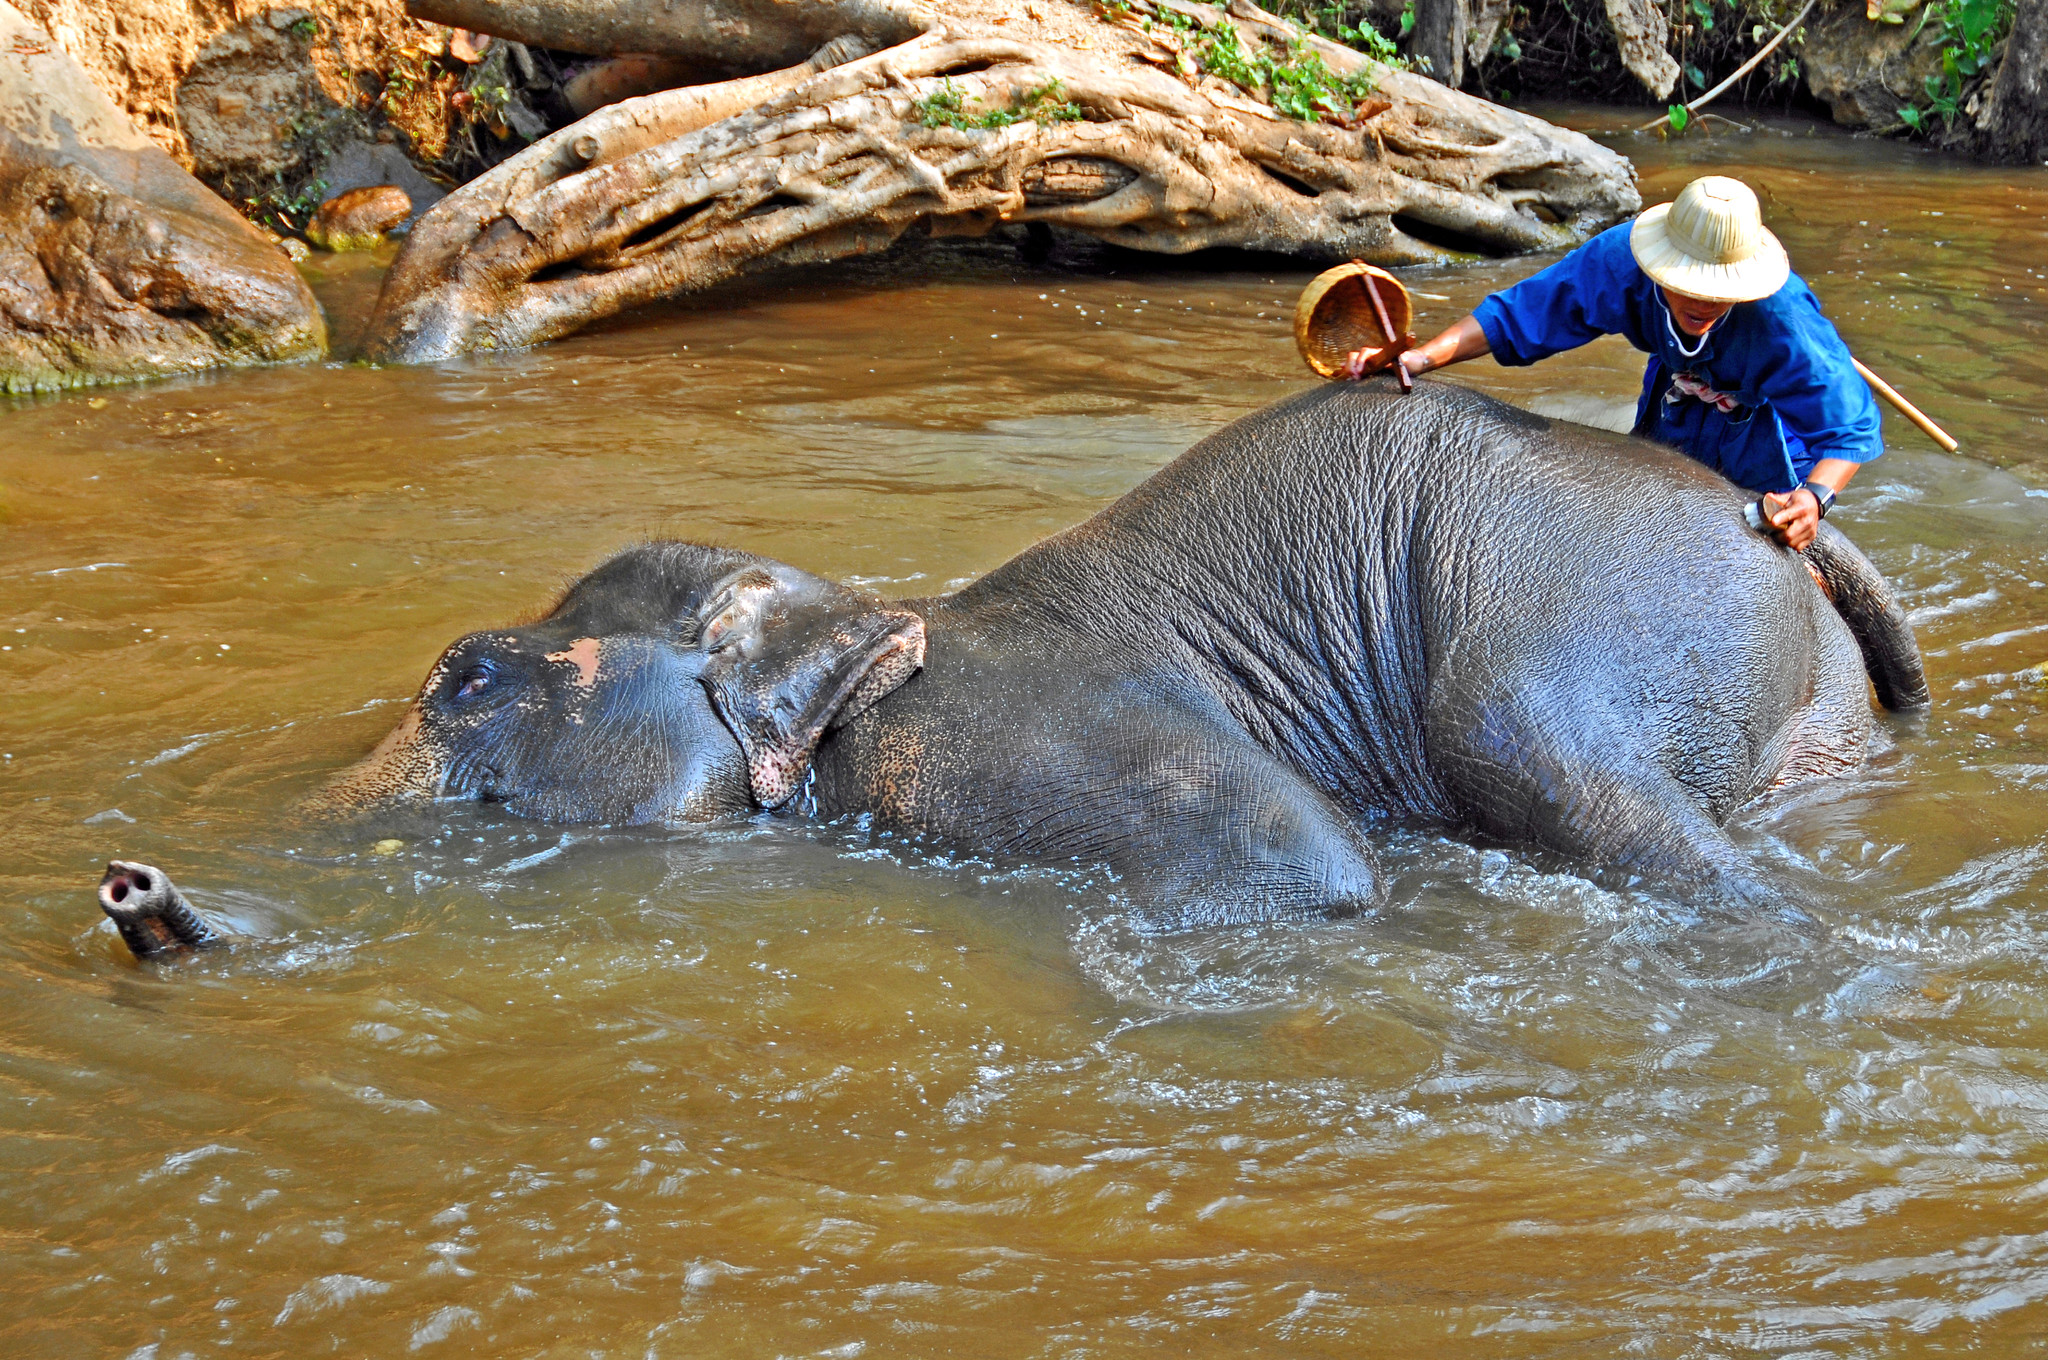 An elephant lies in a stream while a person washes his body with a brush.